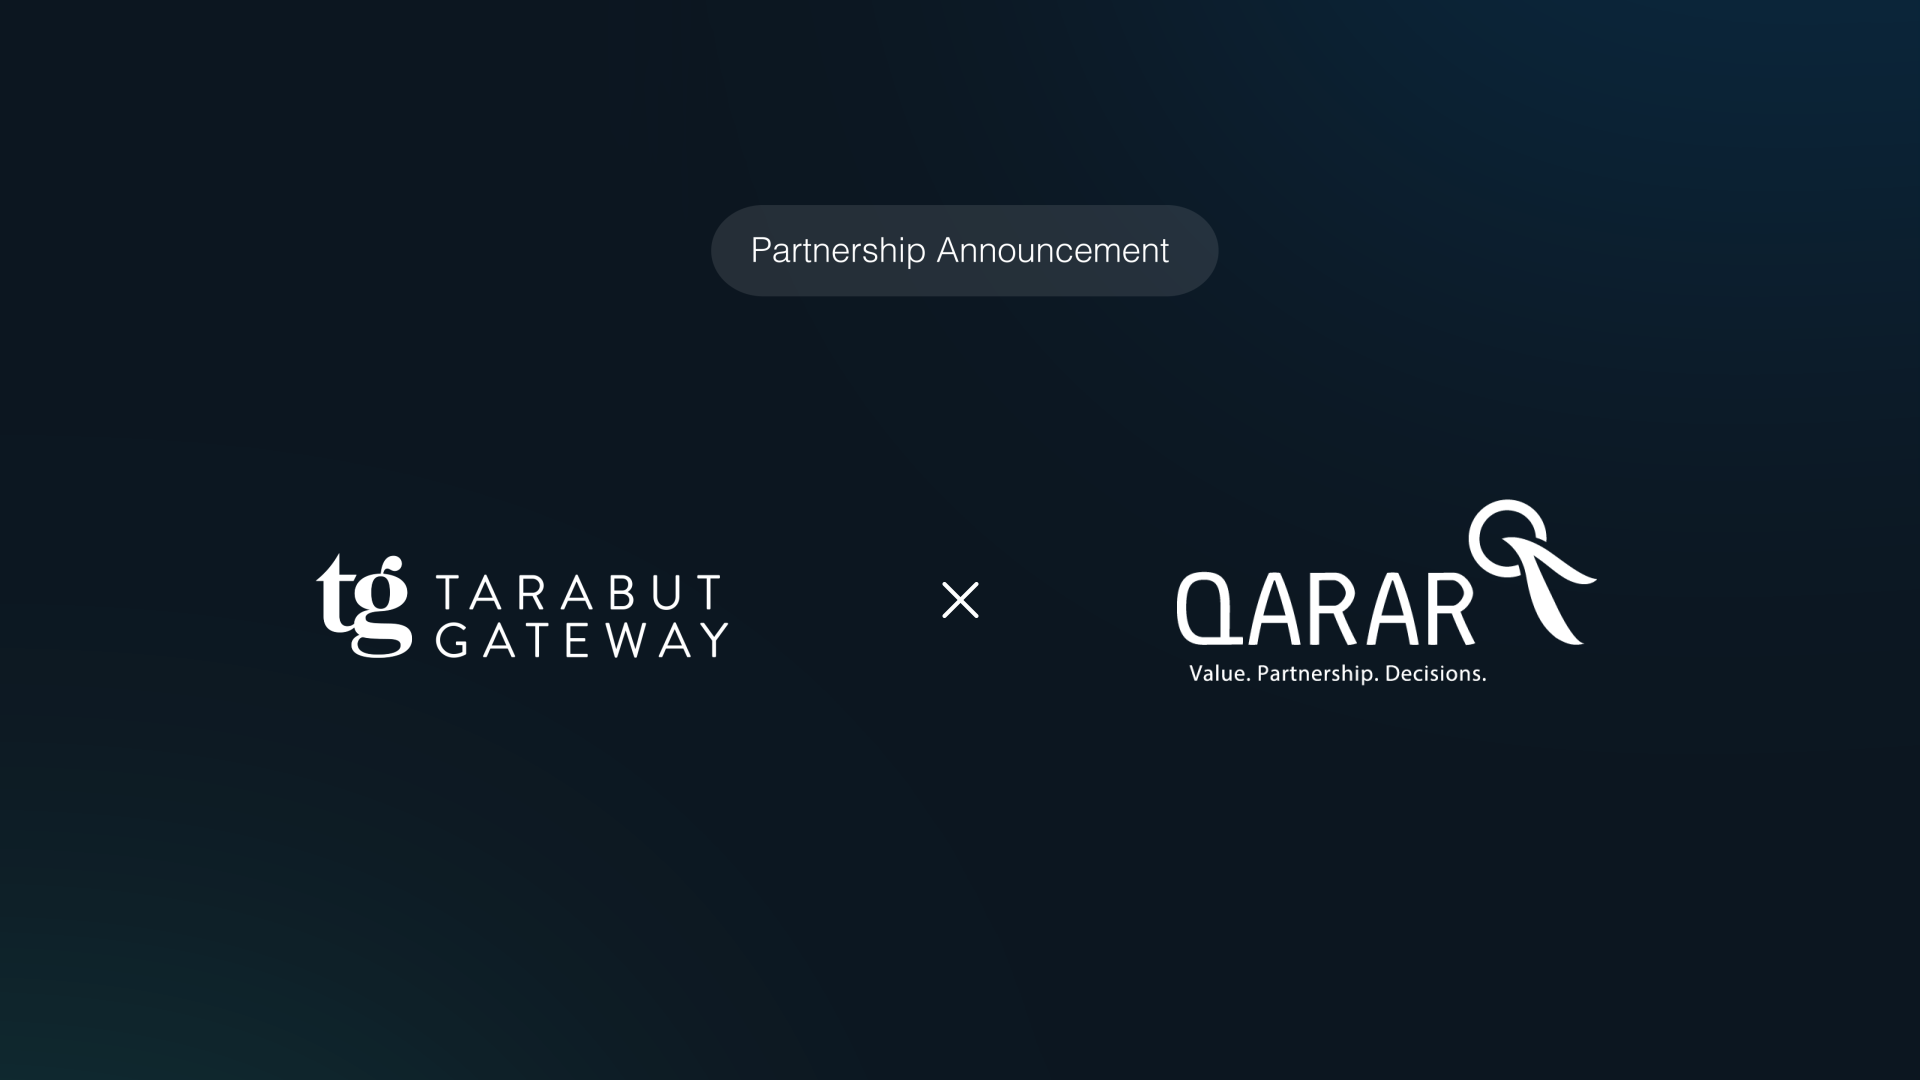  Qarar Partners with Tarabut Gateway to Revolutionise Credit Scoring and Lending in the Middle East 